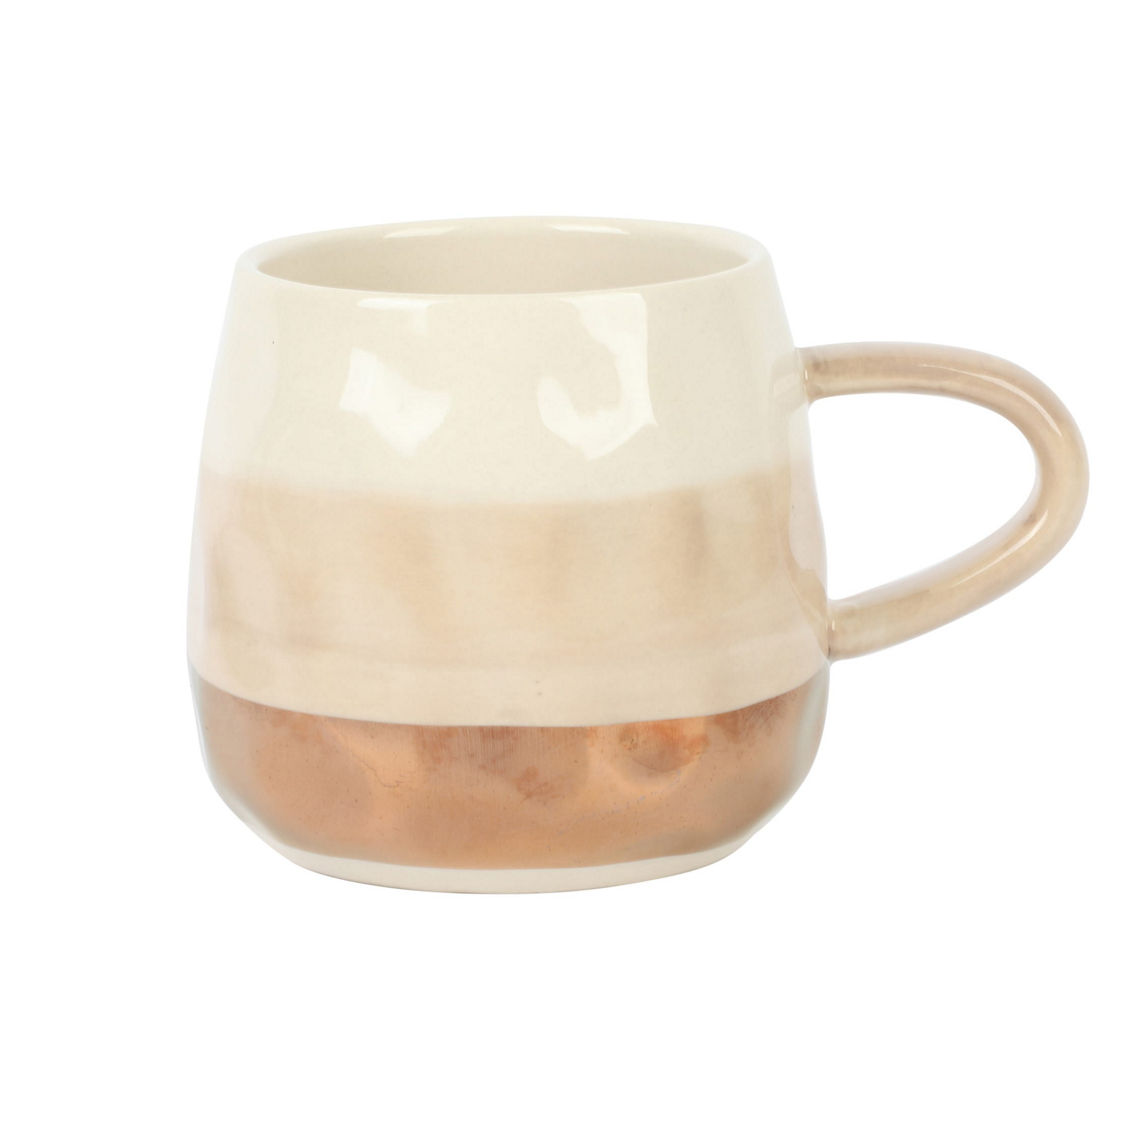 Cravings By Chrissy Teigen 4 Piece 18 Ounce Stoneware Cup Set in Dove Gray - Image 2 of 5